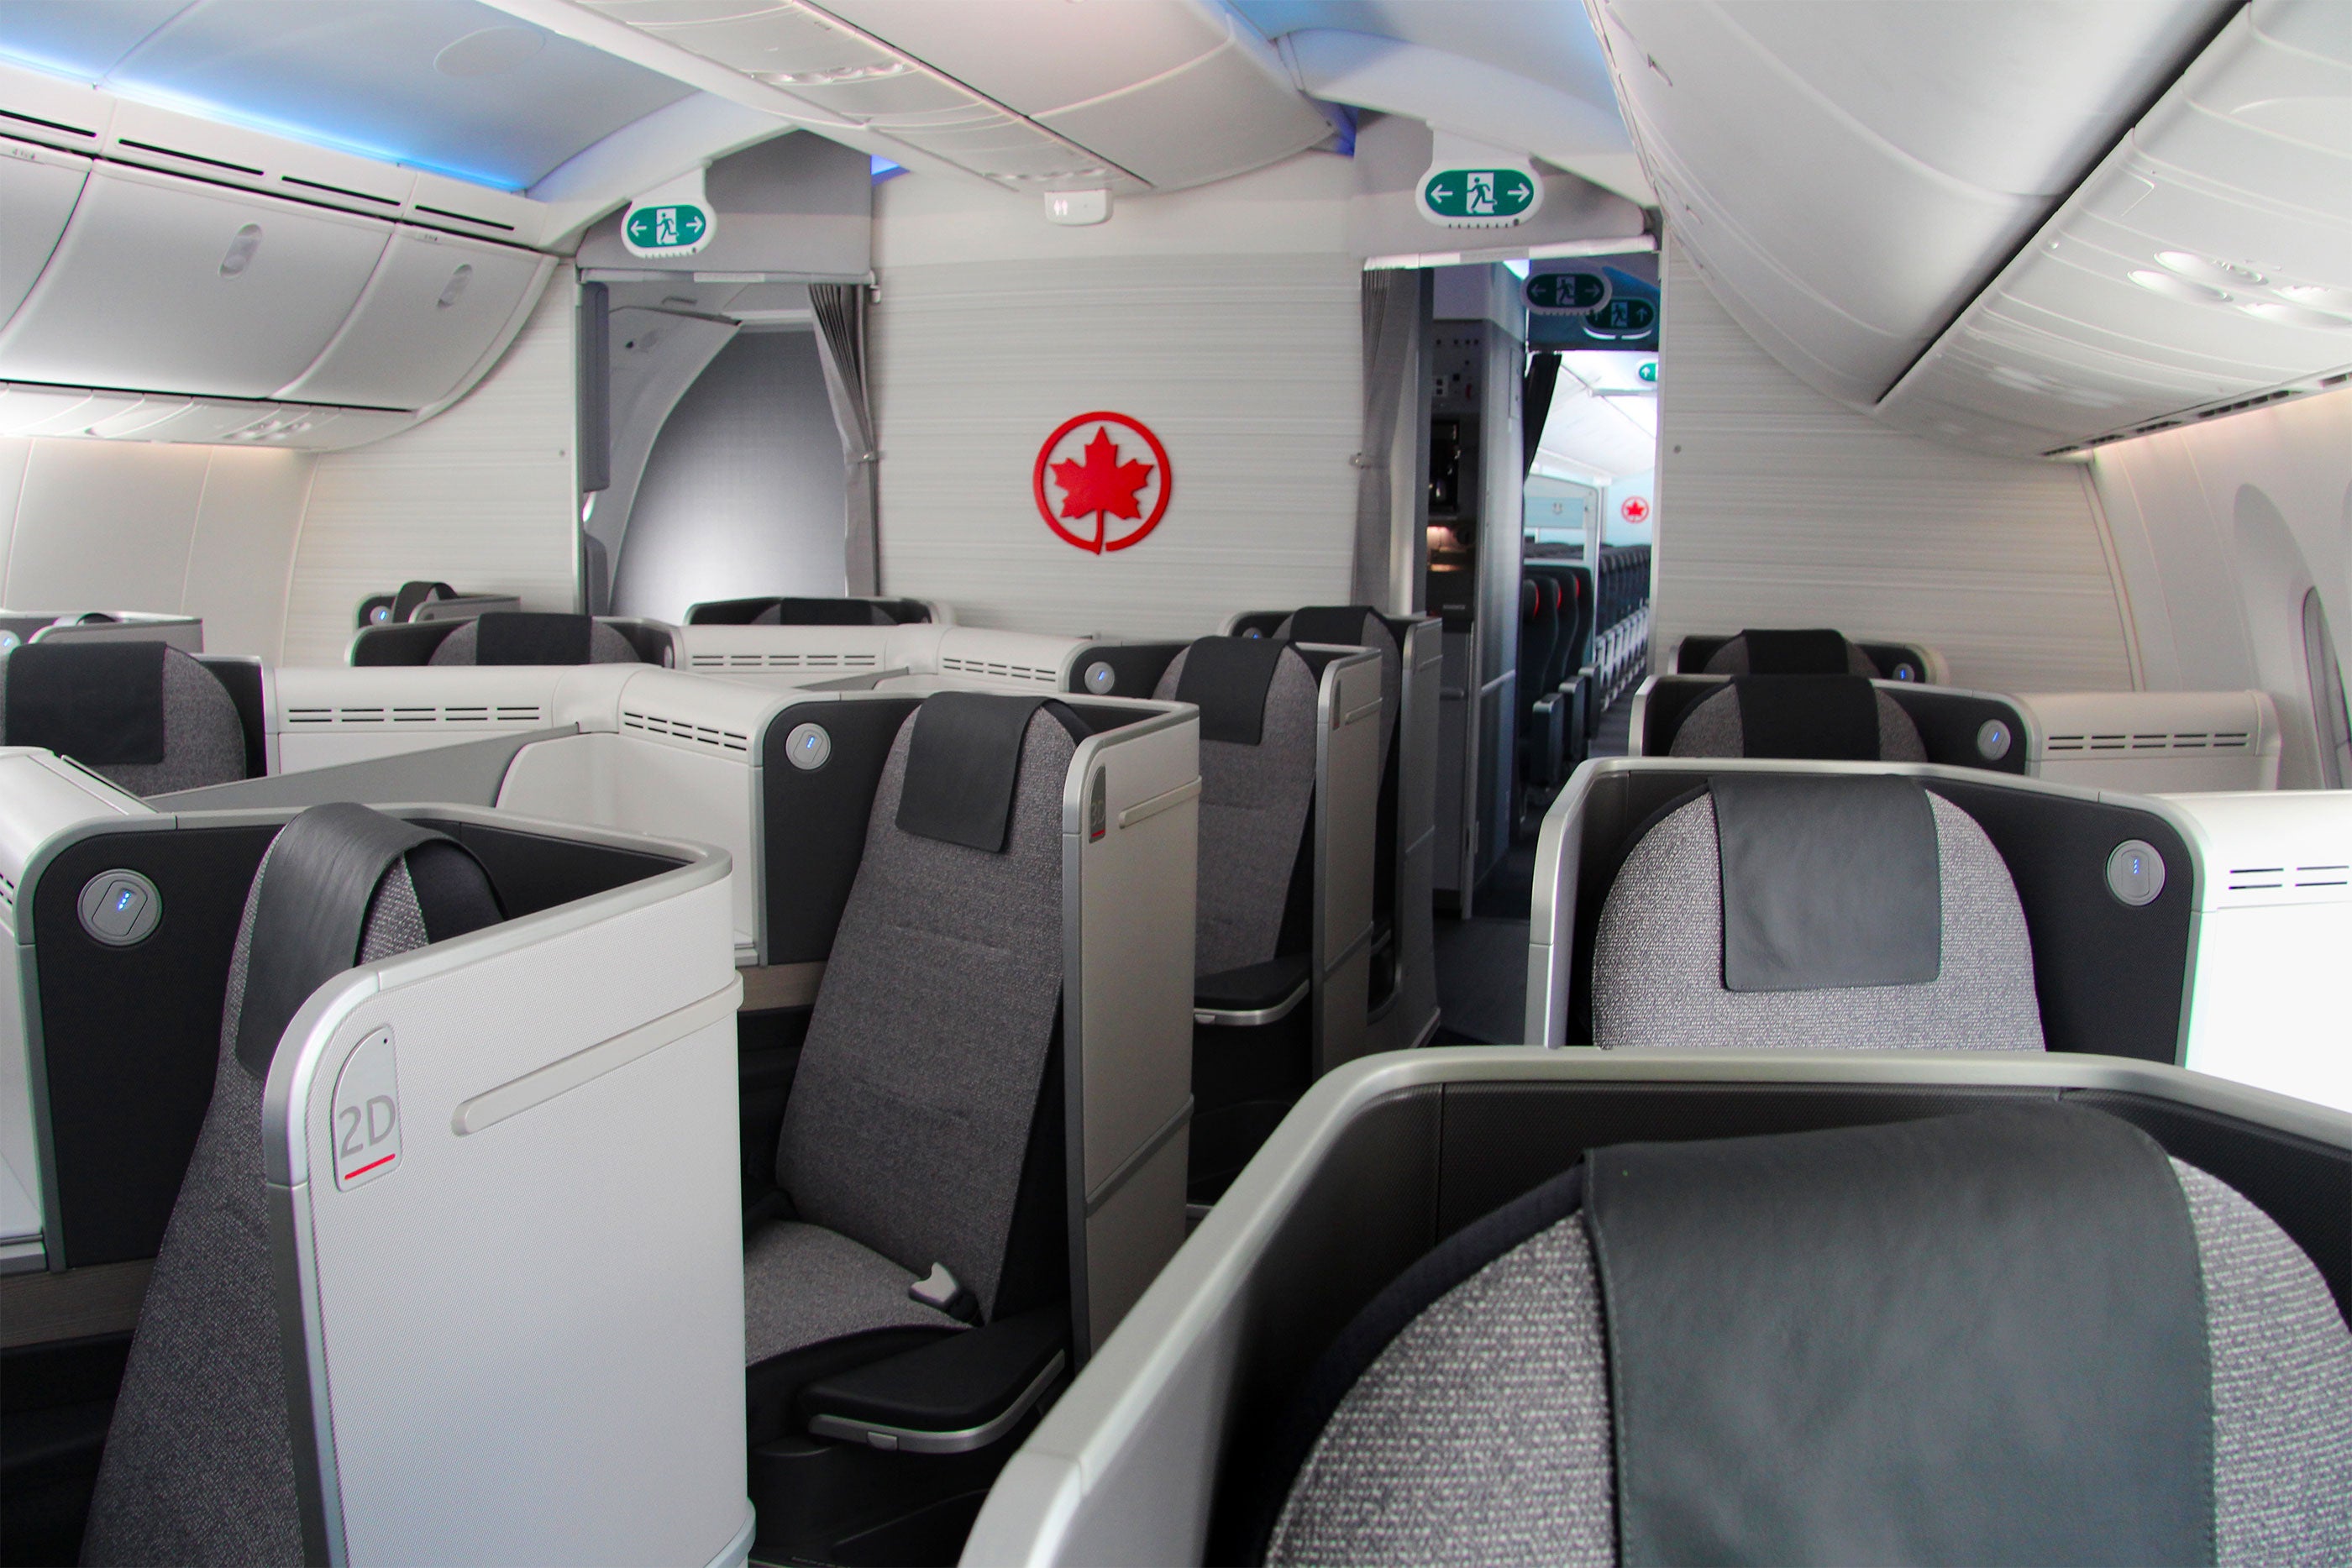 Air Canada's New Air Canada Signature Class cabin on the 787 Dreamliner (Photo courtesy of Air Canada)